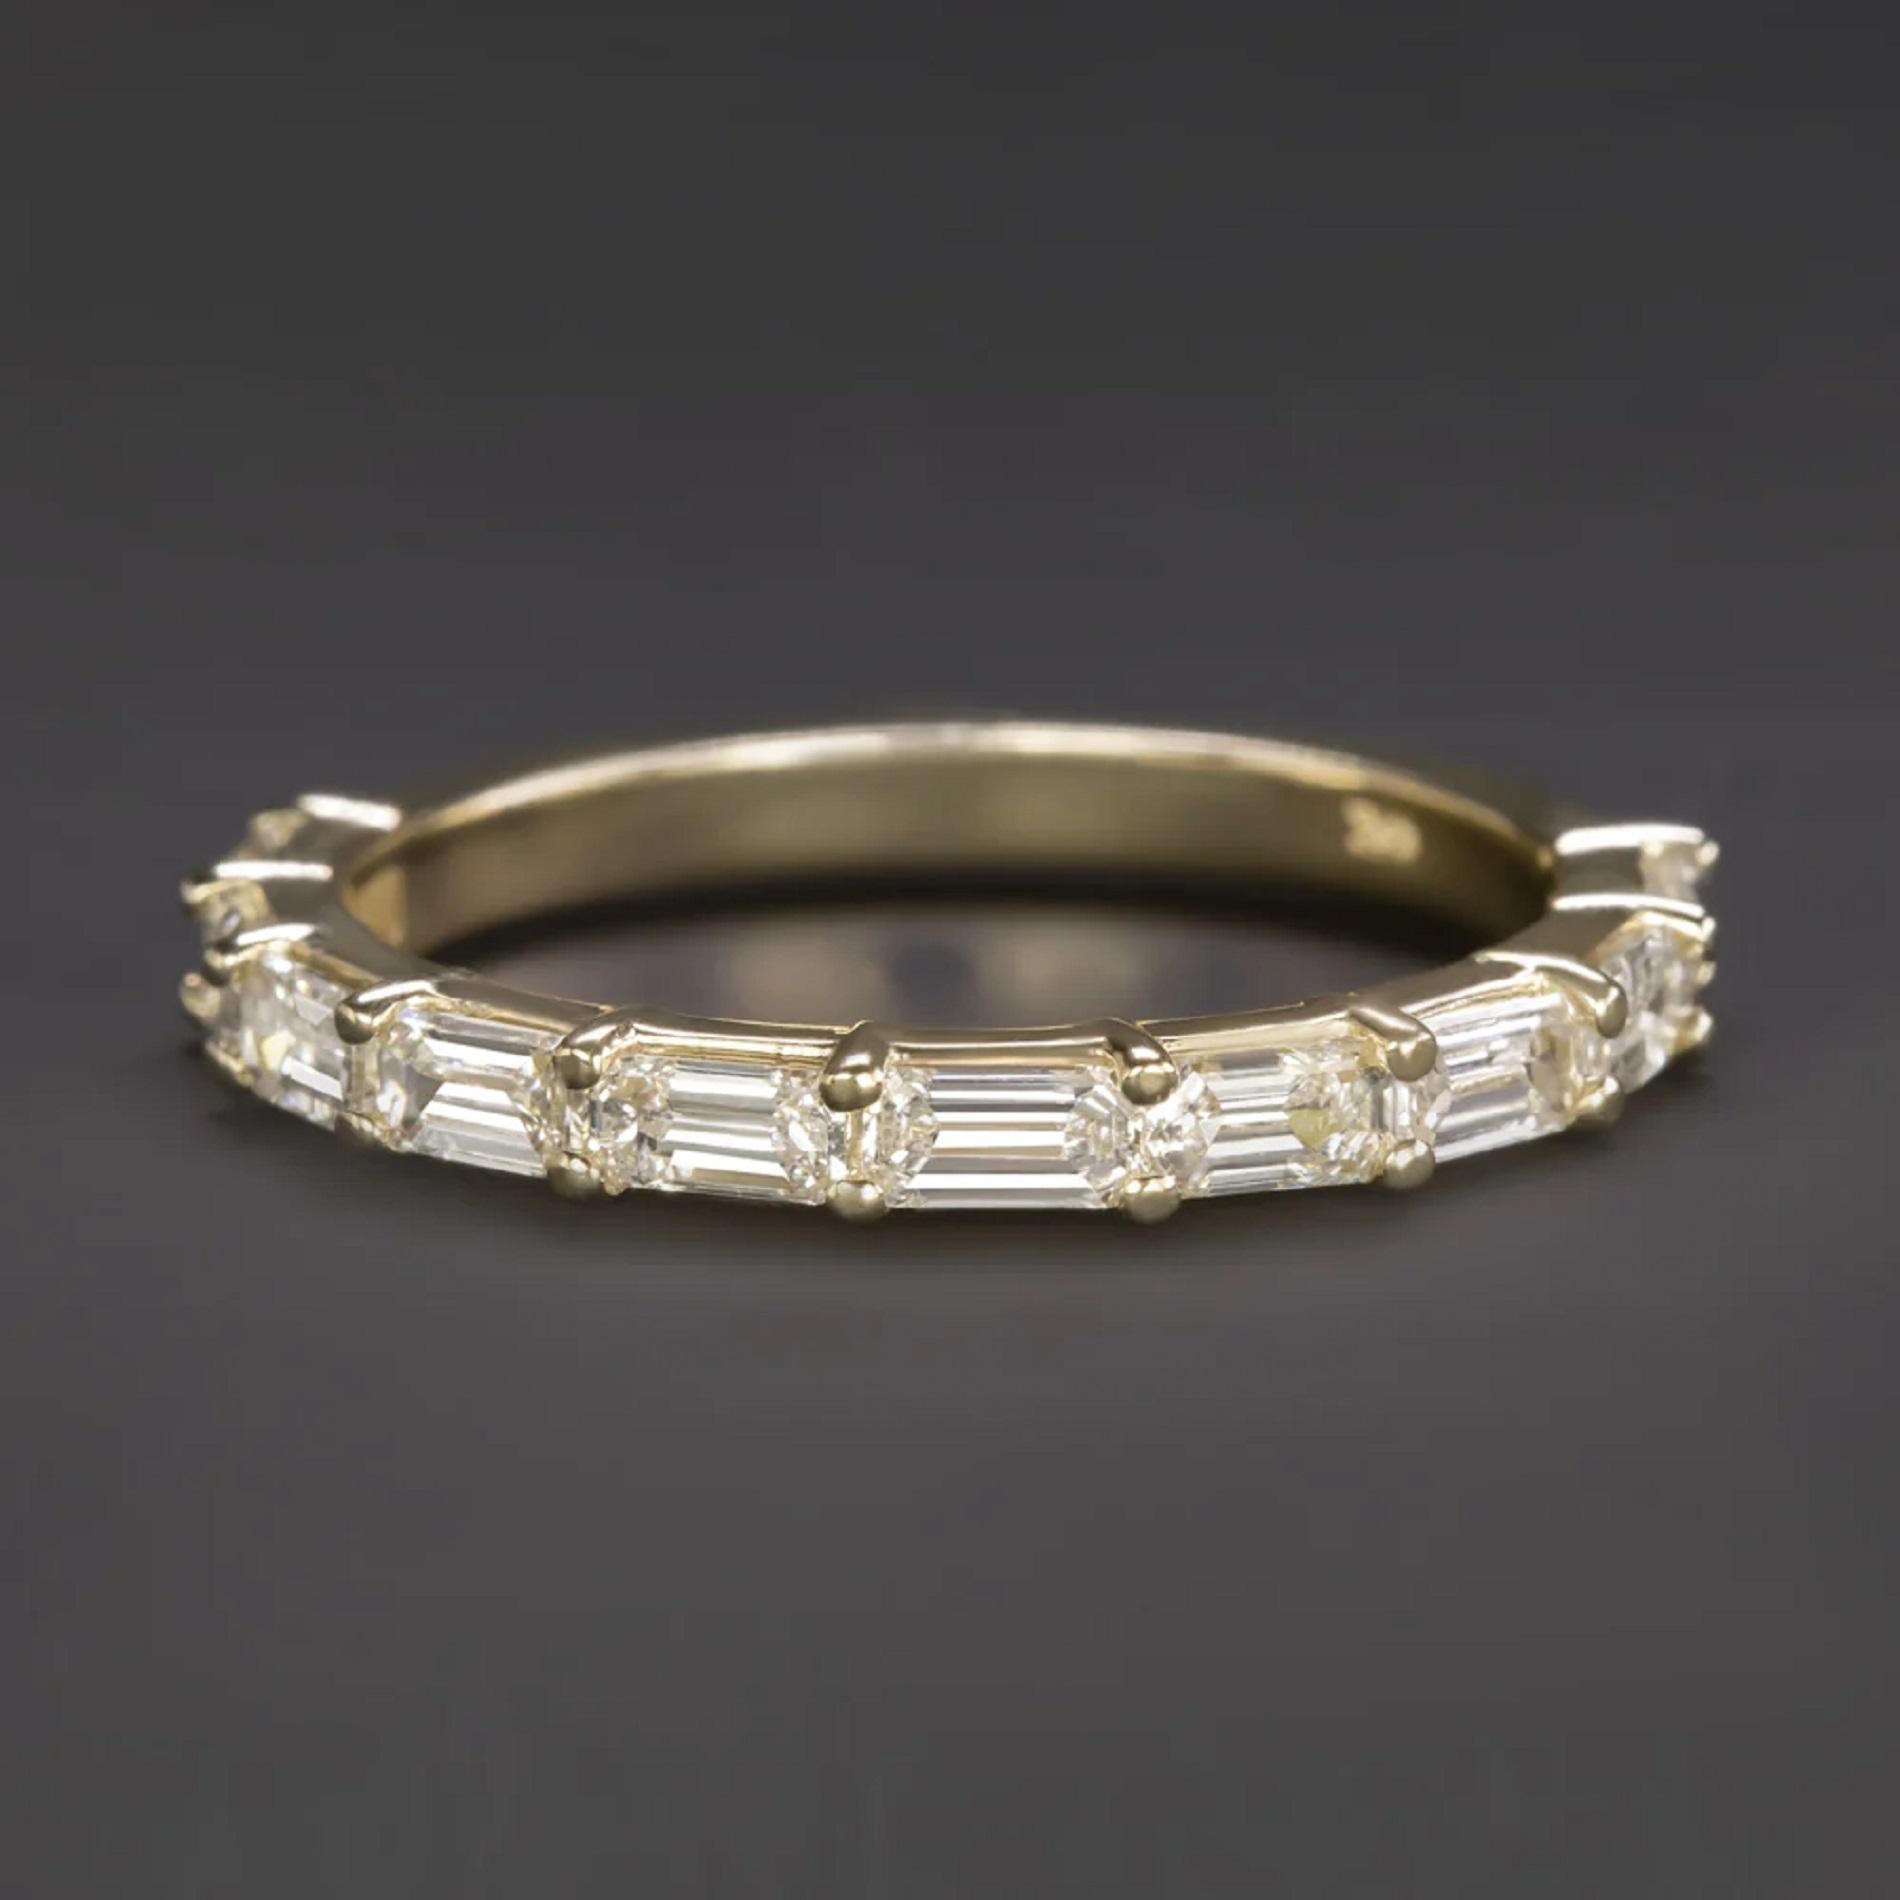 diamond band has a sleek and classic design with chic baguette diamonds set east west! It is perfect for a wedding band or stand alone piece.

Highlights:

- 0.90ct of beautifully white and eye clean diamonds

- Classic 14k yellow gold